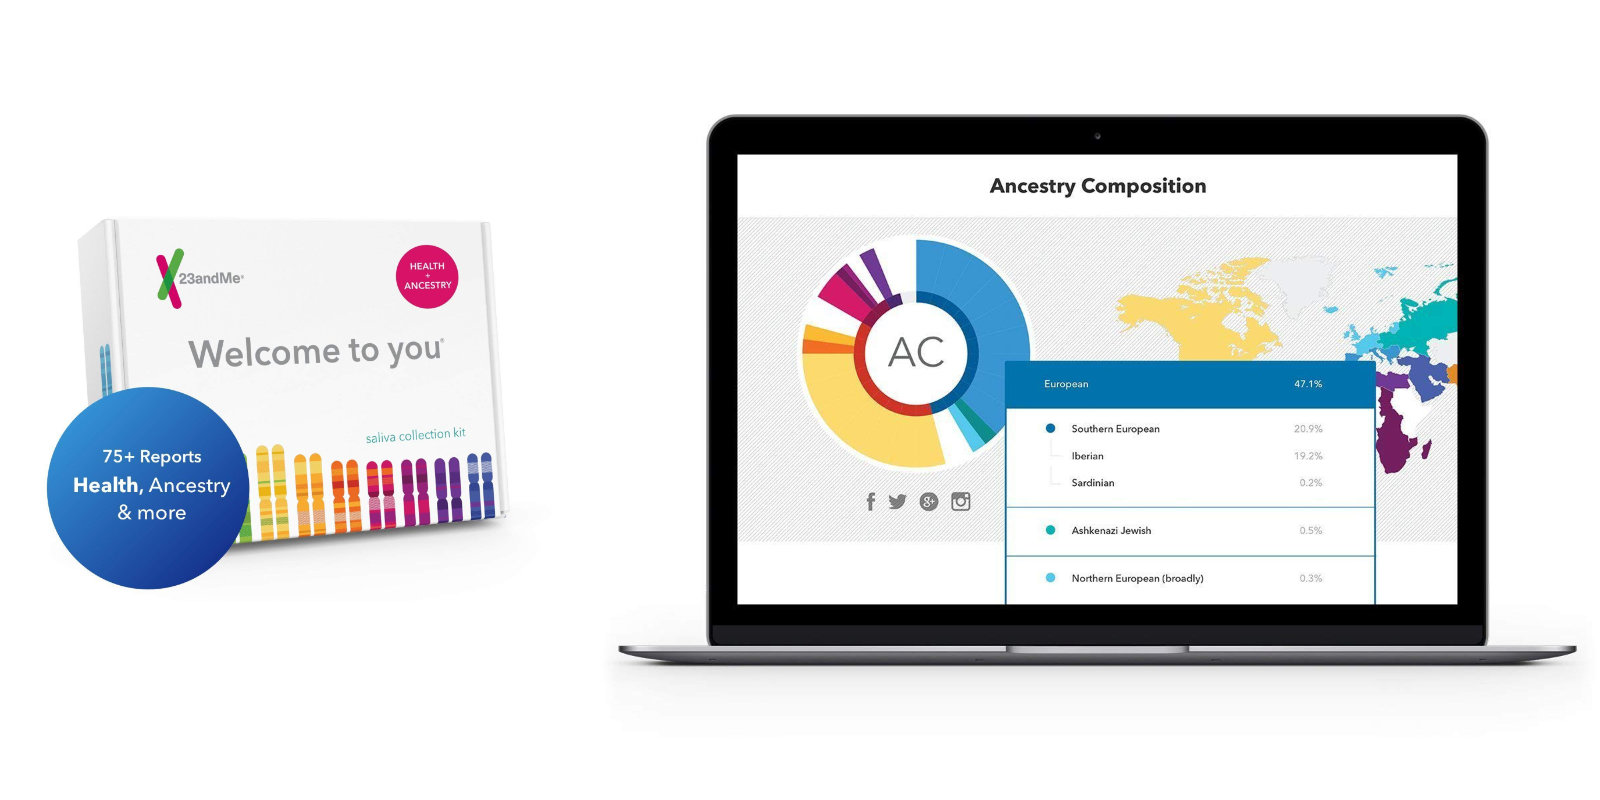 Get $50 Off A Health + Ancestry Kit From 23andMe!